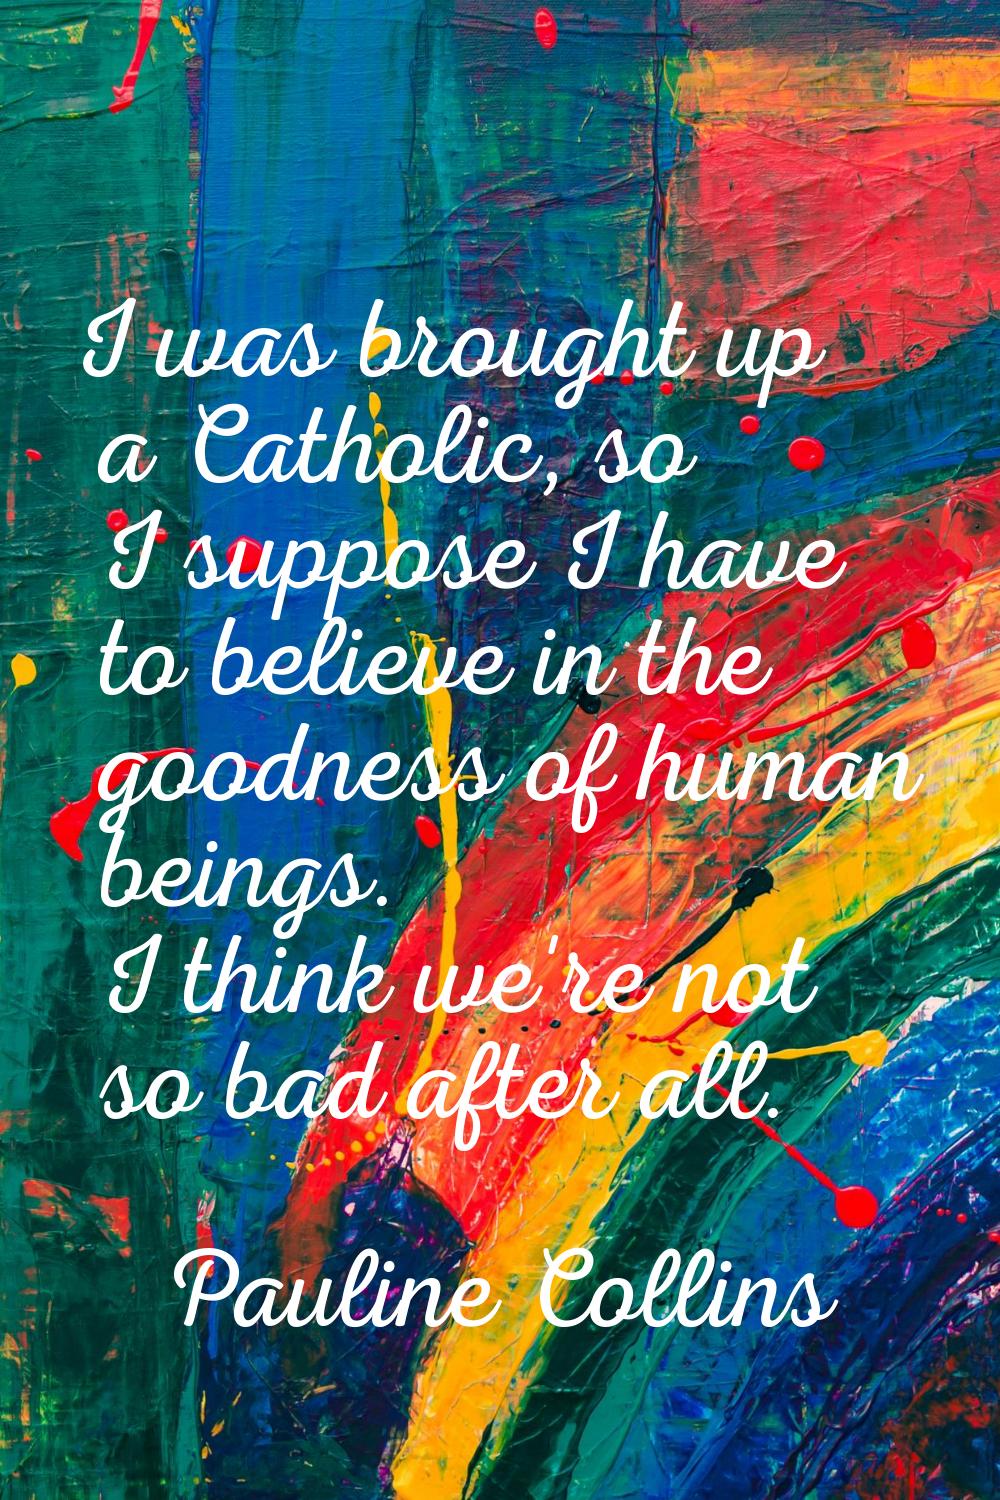 I was brought up a Catholic, so I suppose I have to believe in the goodness of human beings. I thin